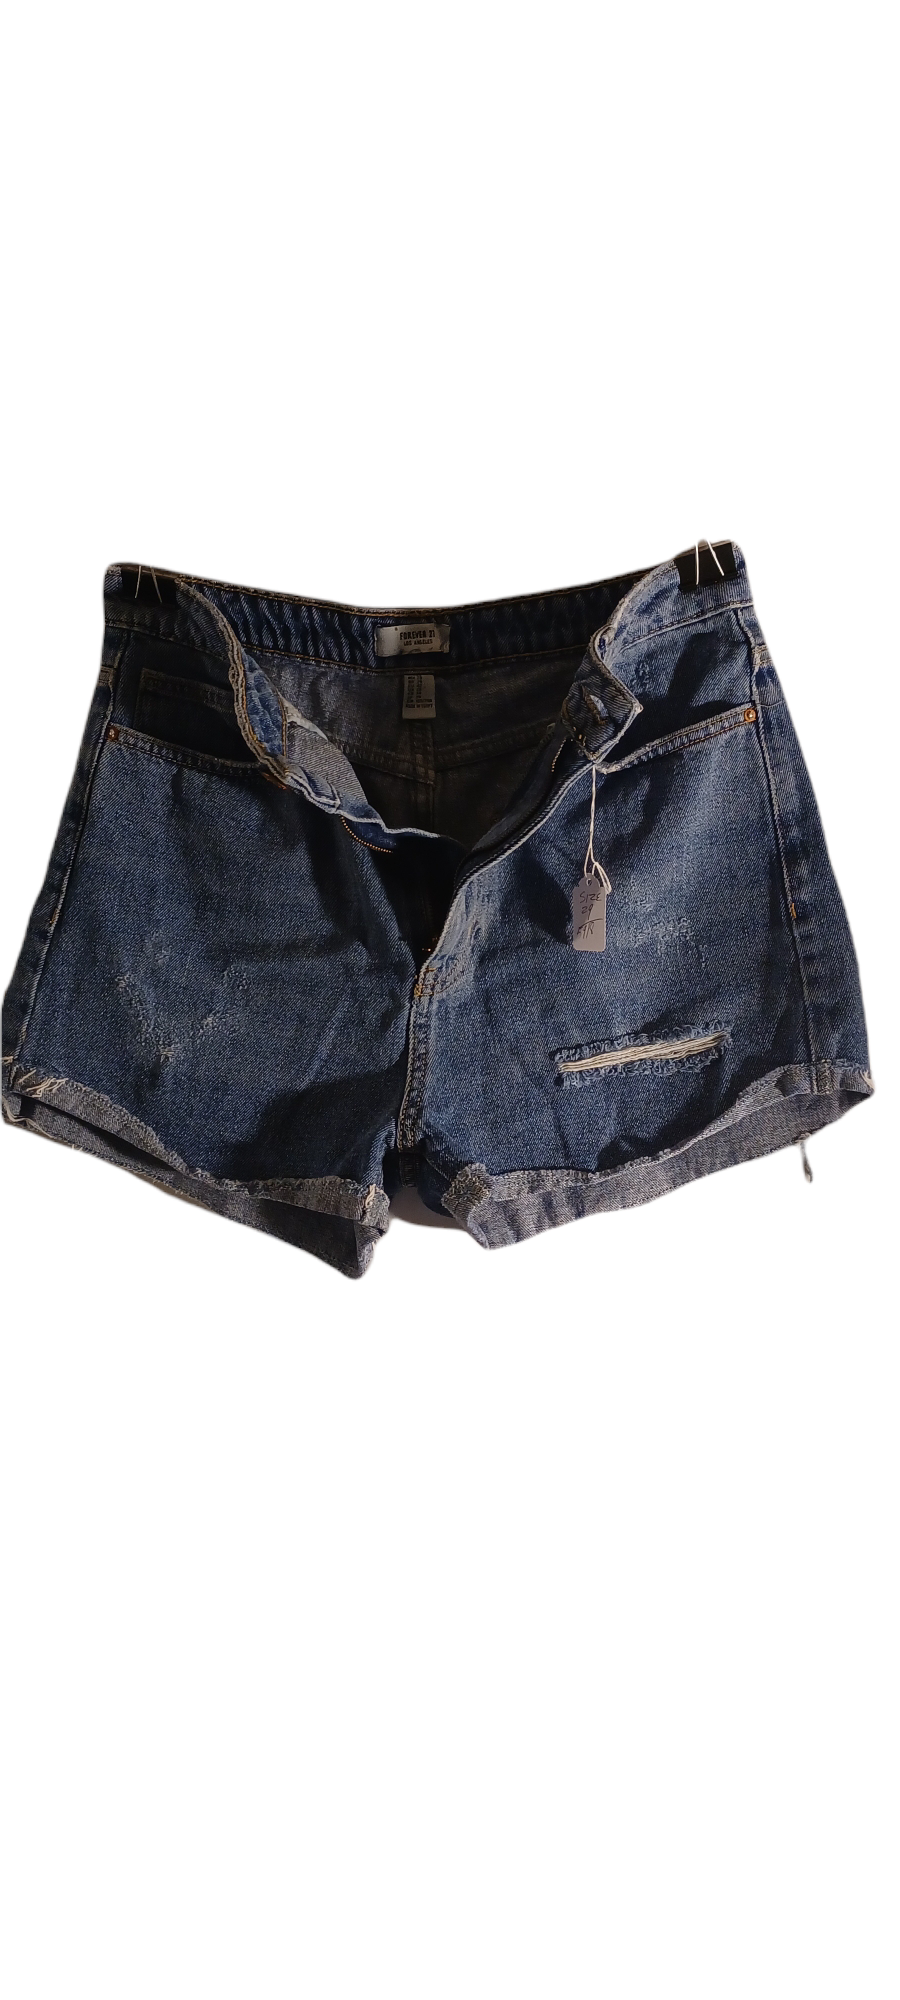 PRE-OWNED....Forever 21 Jean Shorts Size 29